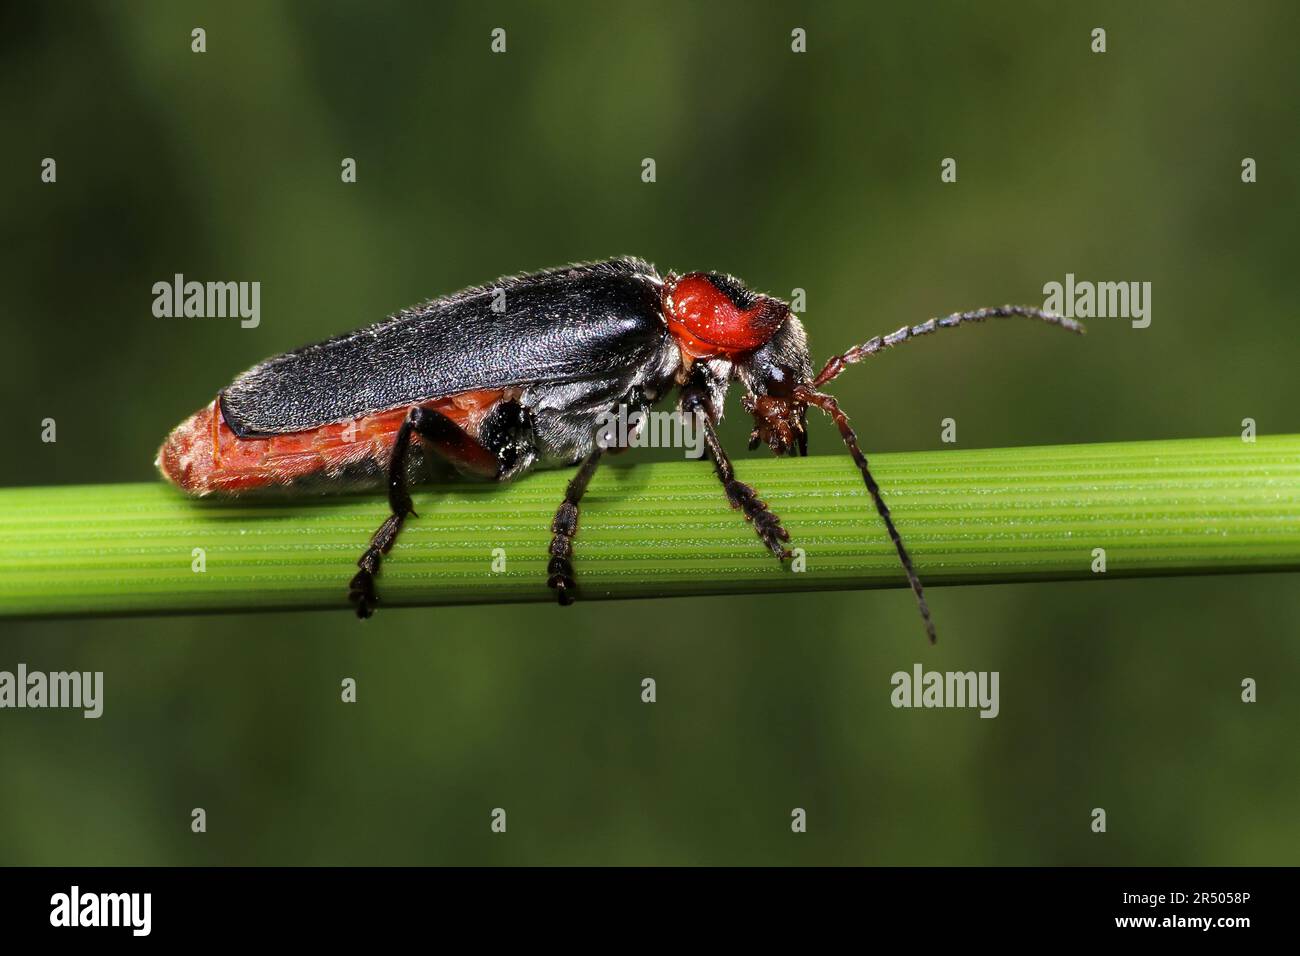 Soldier Beetle Cantharis rustica Stock Photo